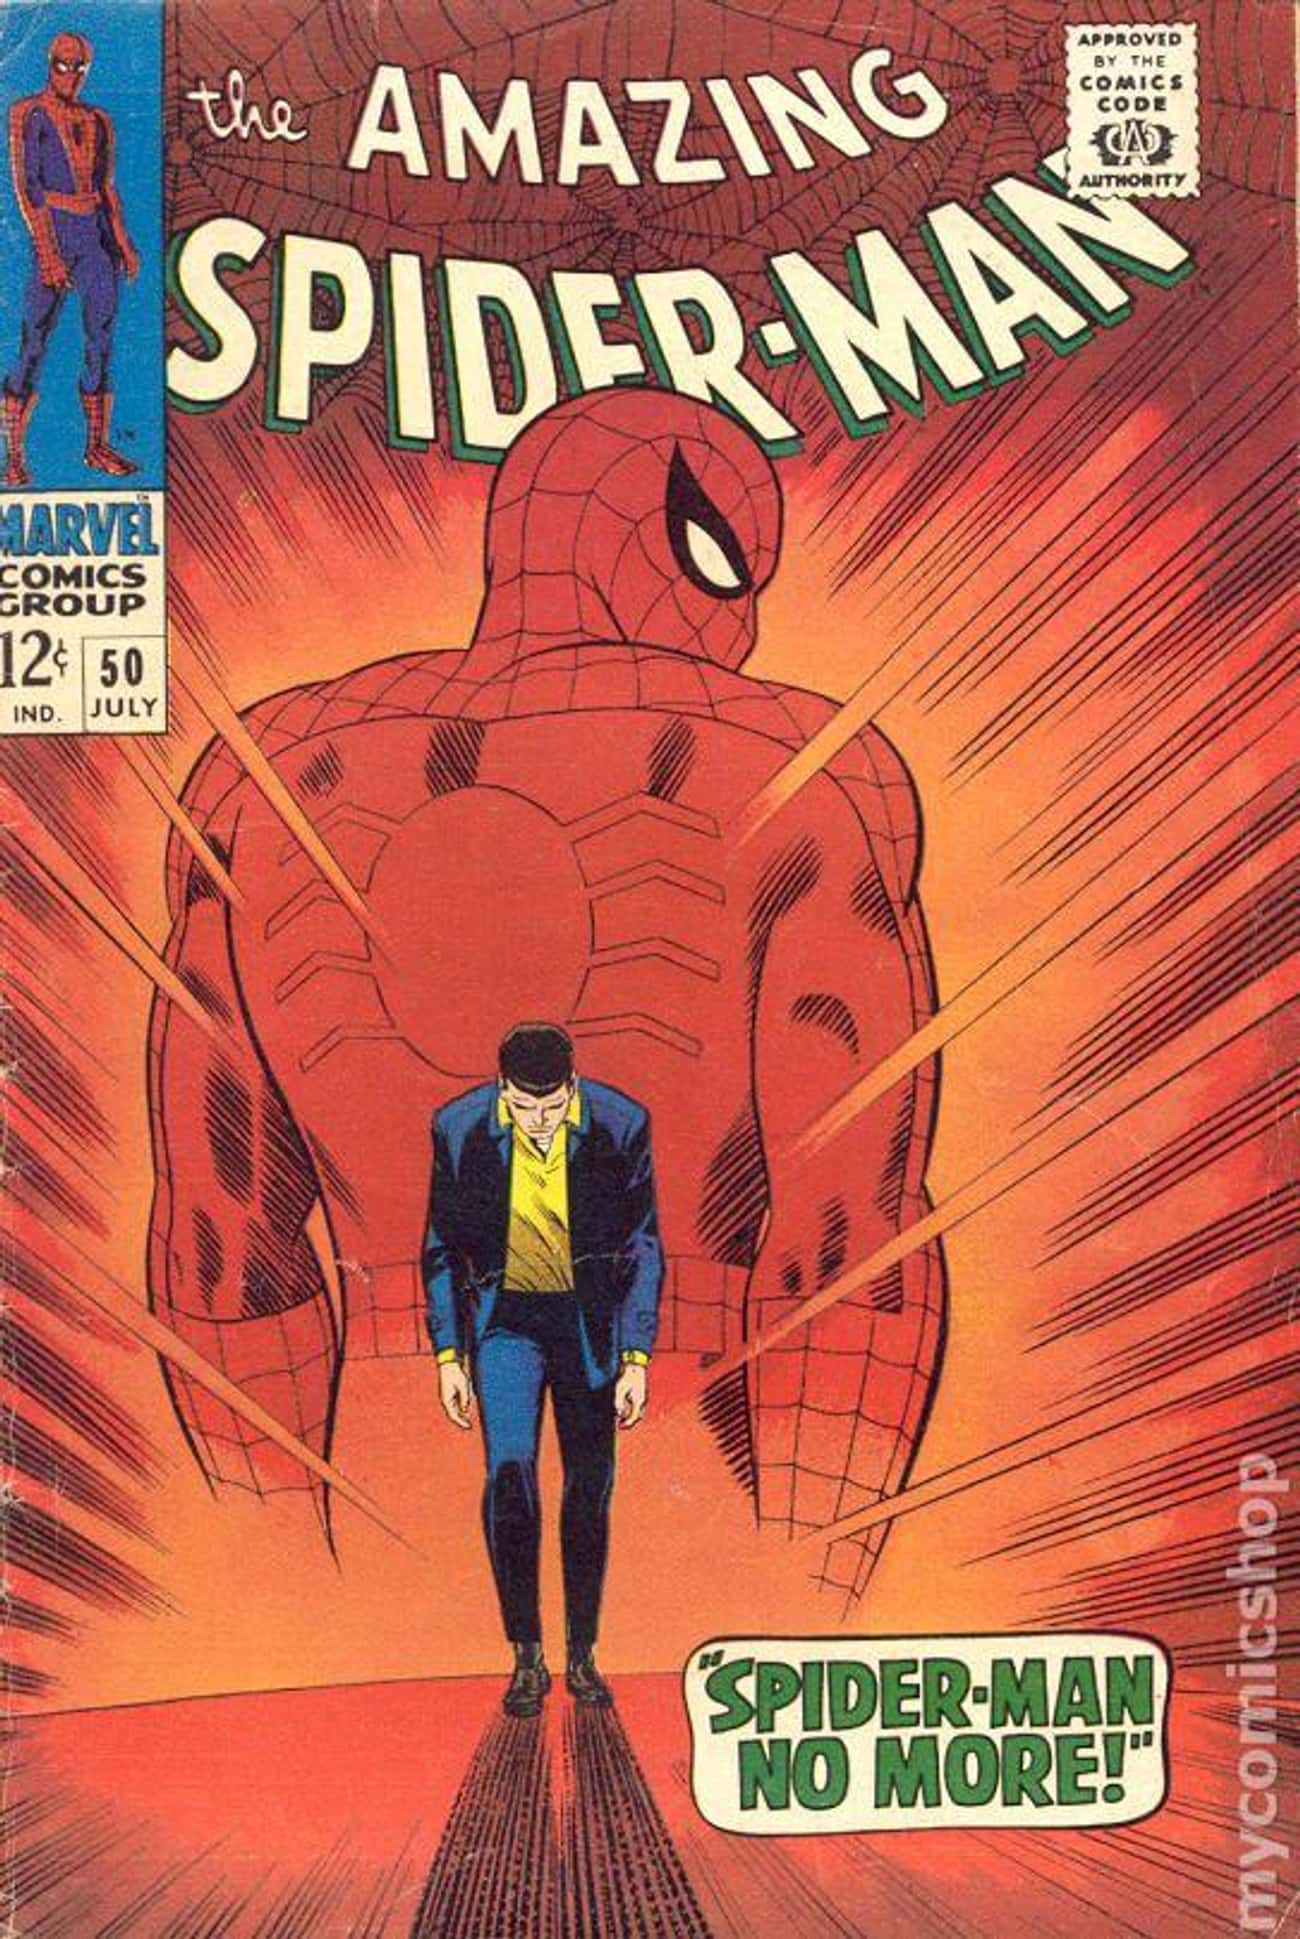 Best Comic Book Covers of the 1960s | Coolest 60s Comic Book Covers